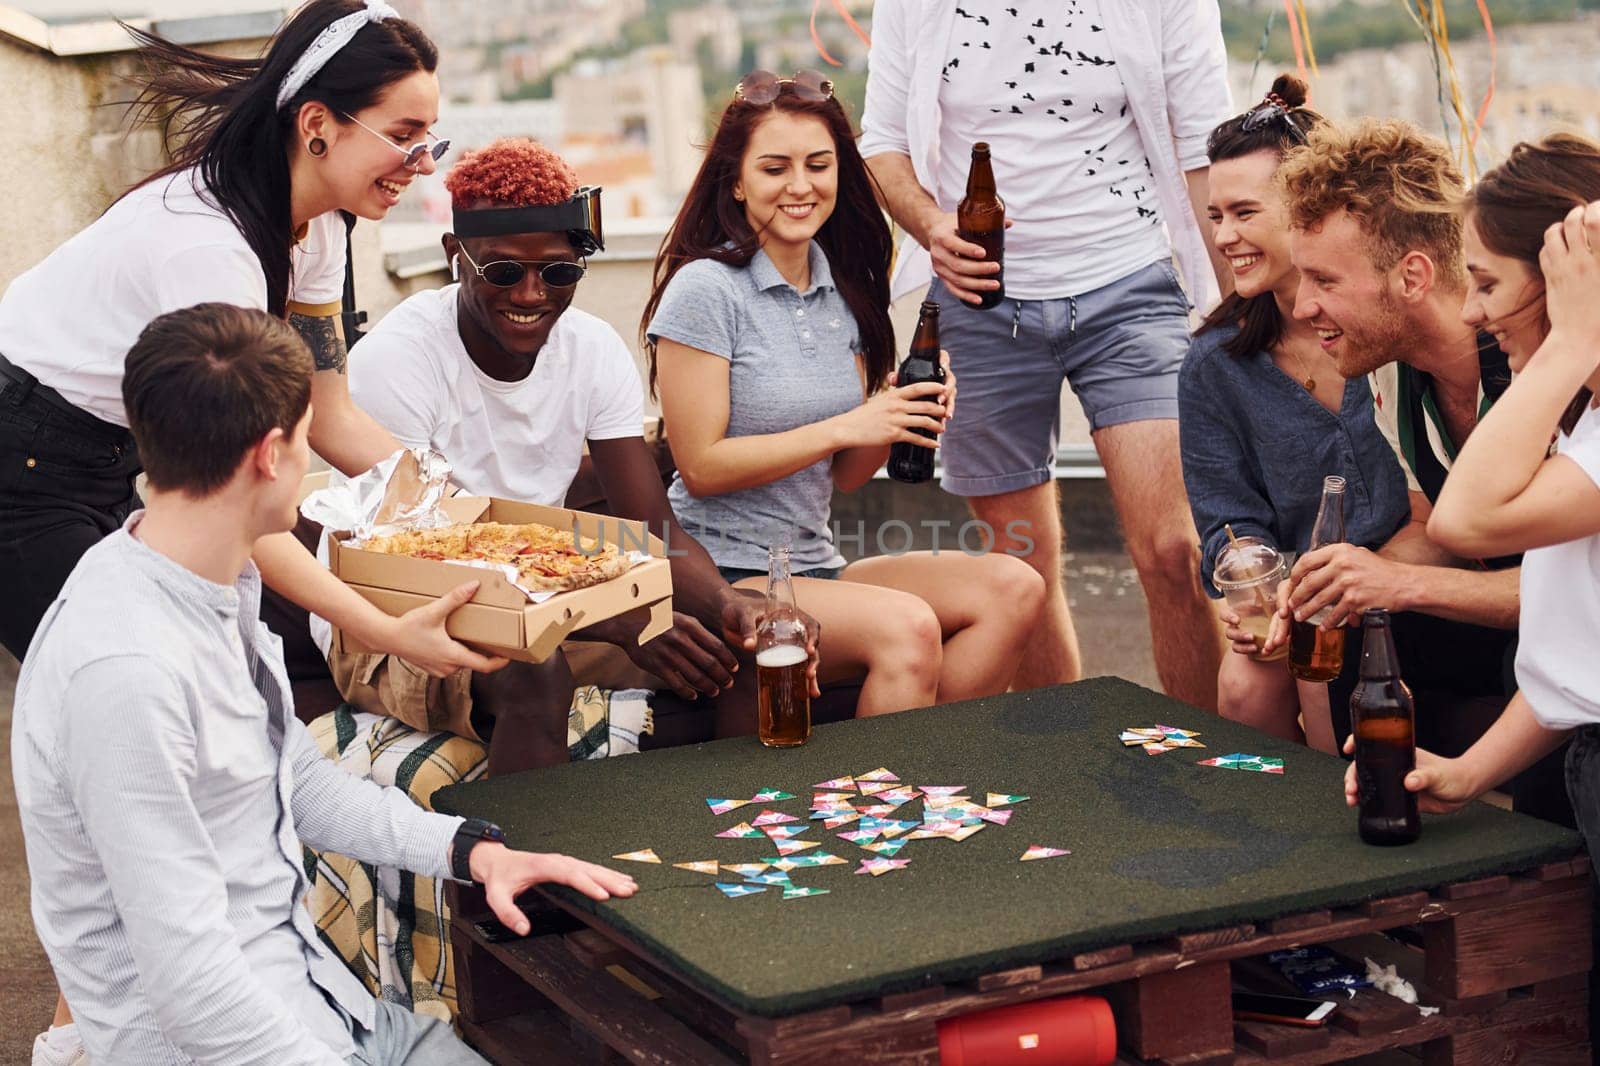 With delicious pizza. Group of young people in casual clothes have a party at rooftop together at daytime.